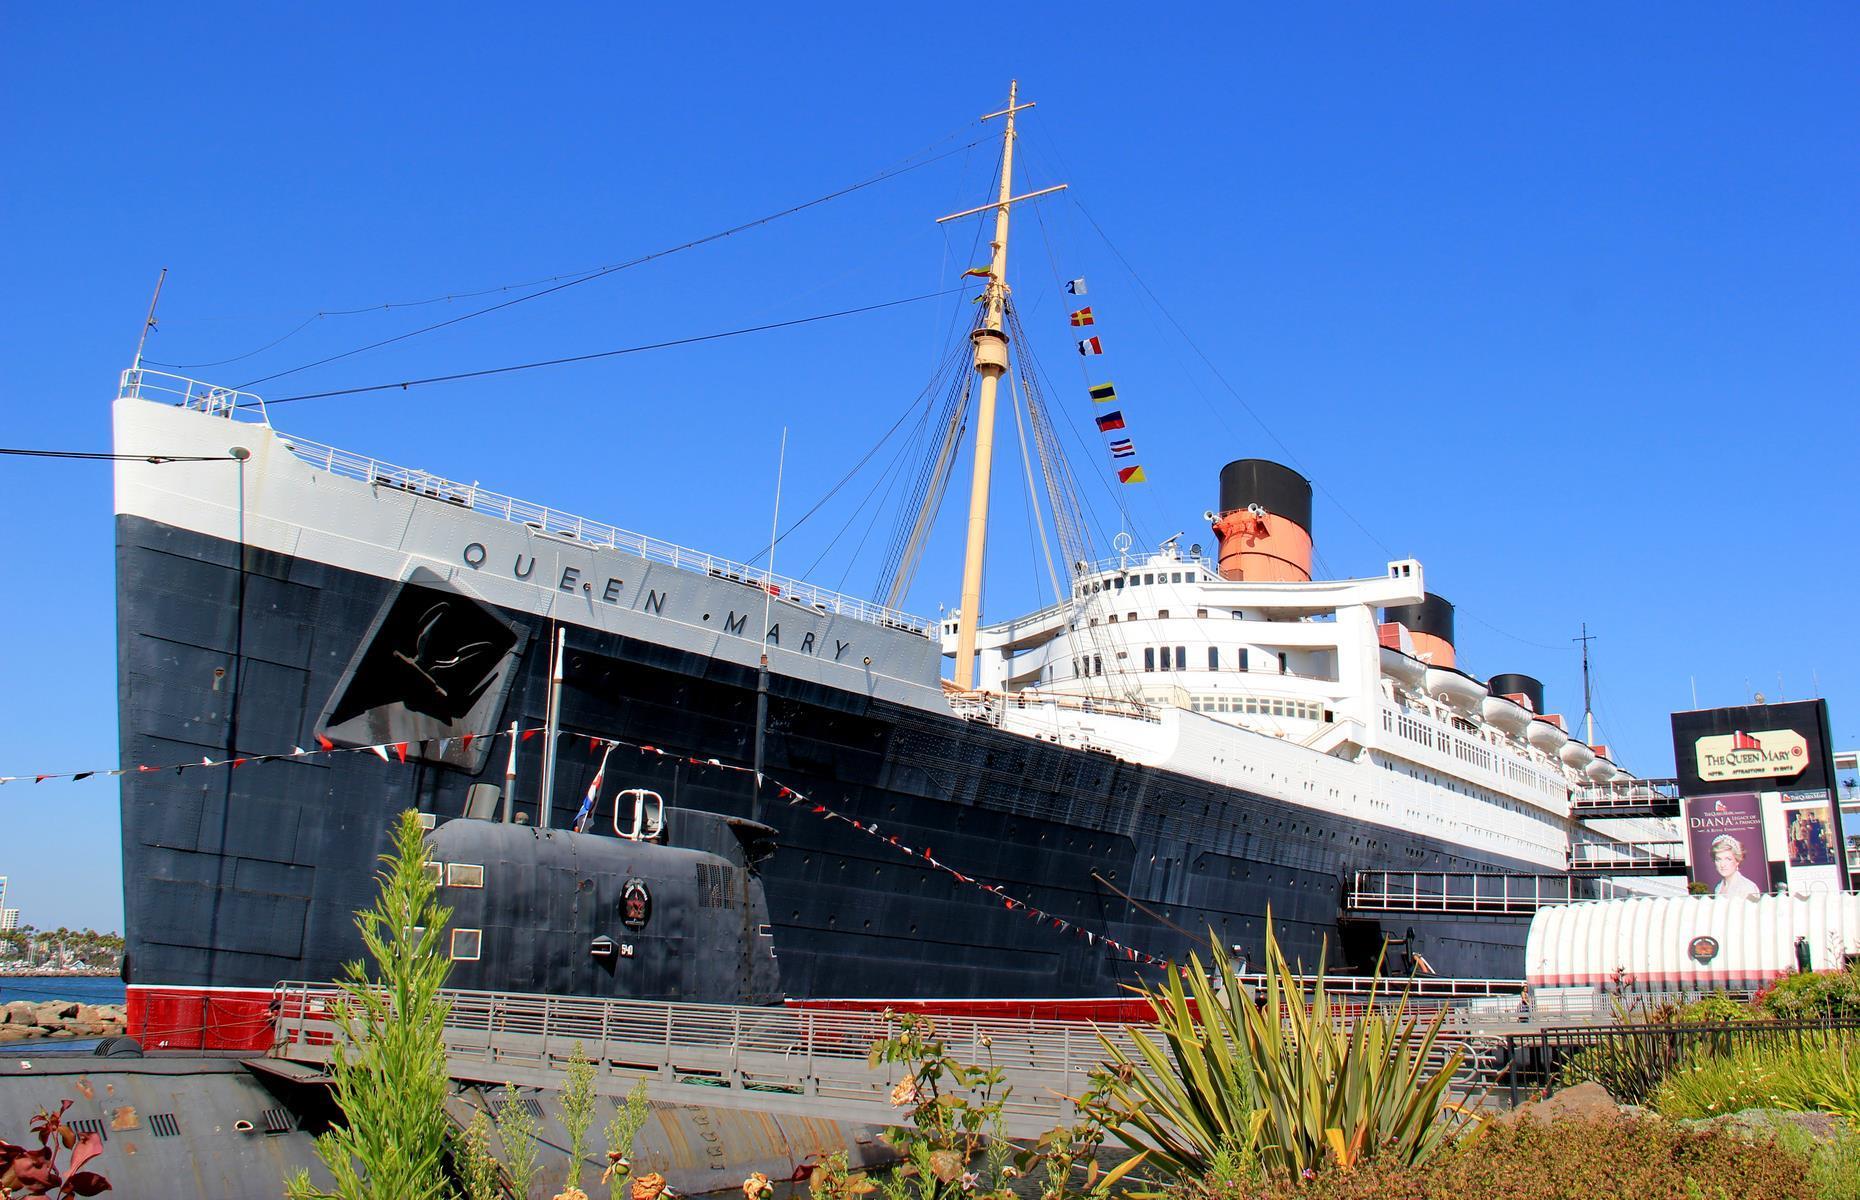 <p>Fancy a night on the world's most haunted ship? That's exactly what the <a href="https://www.queenmary.com/">RMS Queen Mary</a> is purported to be. She began life as a cruise ship, then entered service as a troopship, and is now a floating hotel. But, in the 1940s, a passenger supposedly died in State Room B340 and it's been the site of paranormal activity ever since. Visitors report seeing ghostly forms in the dark and even having their bedclothes ripped from them while they slept. Tarot cards and a Ouija board are offered to those who brave a night here.</p>